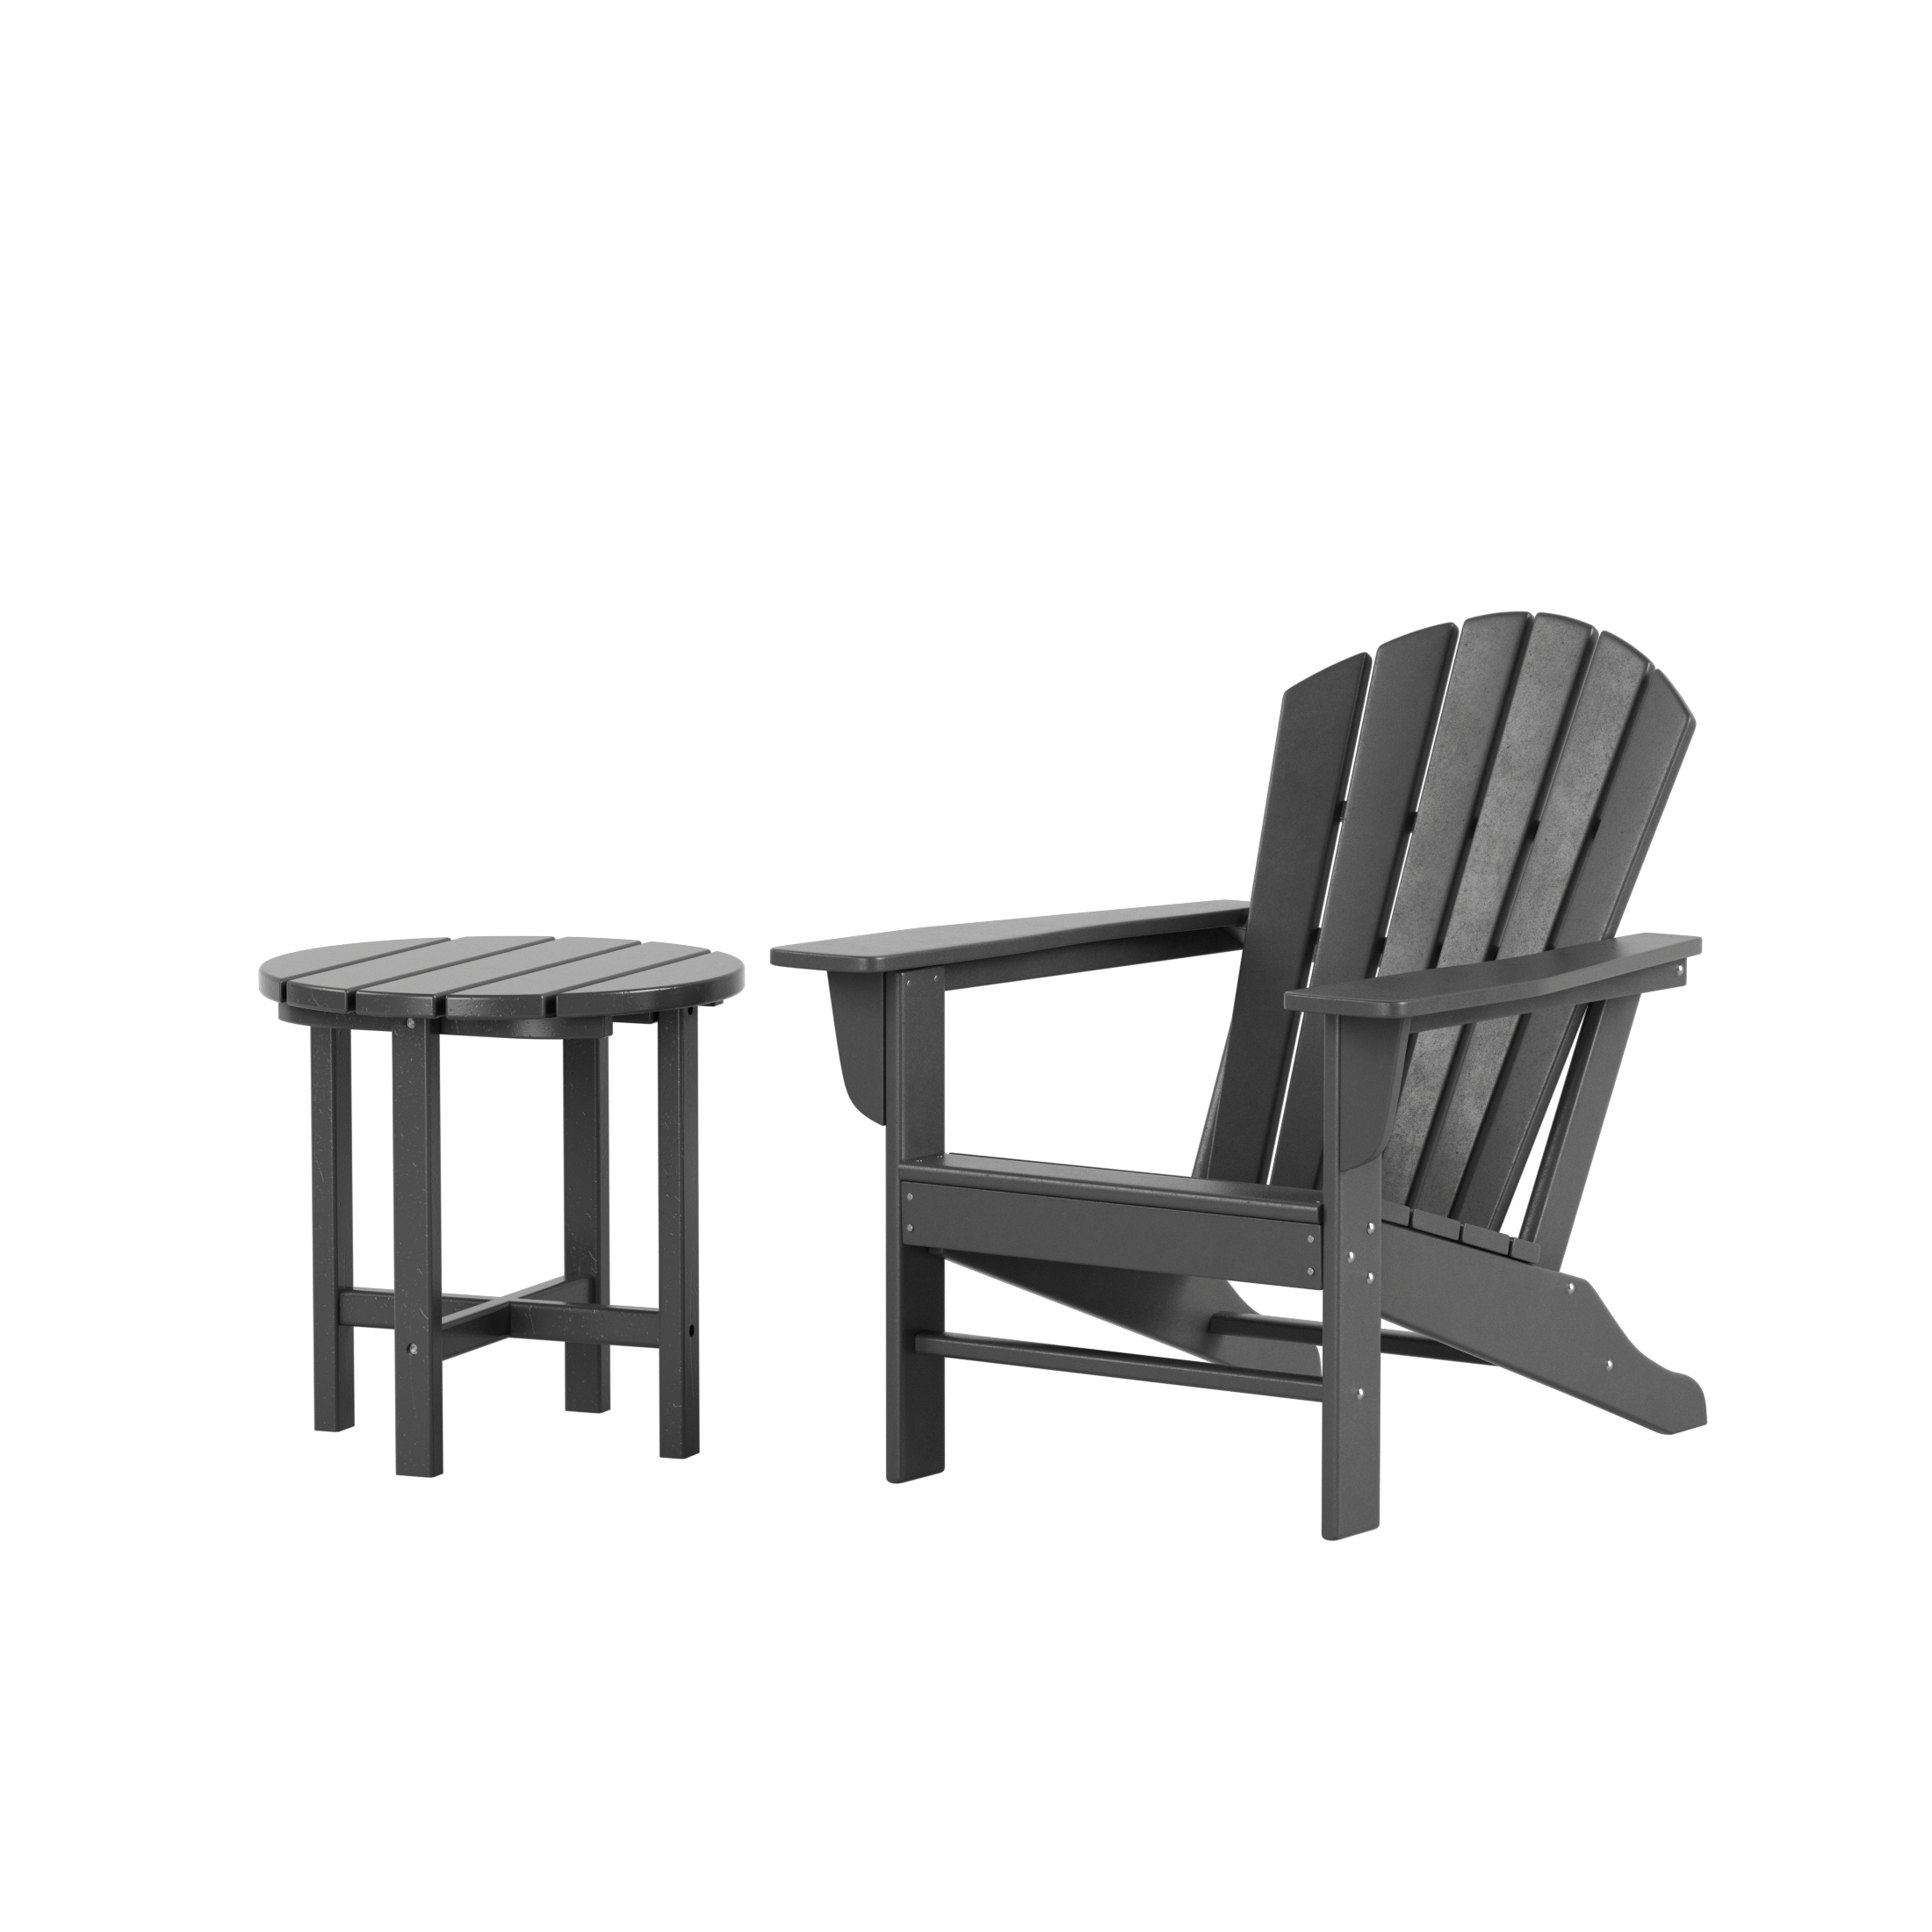 Westin Outdoor with Side Table HDPE Plastic Adirondack Chair - Gray (Set of 2) - image 2 of 5